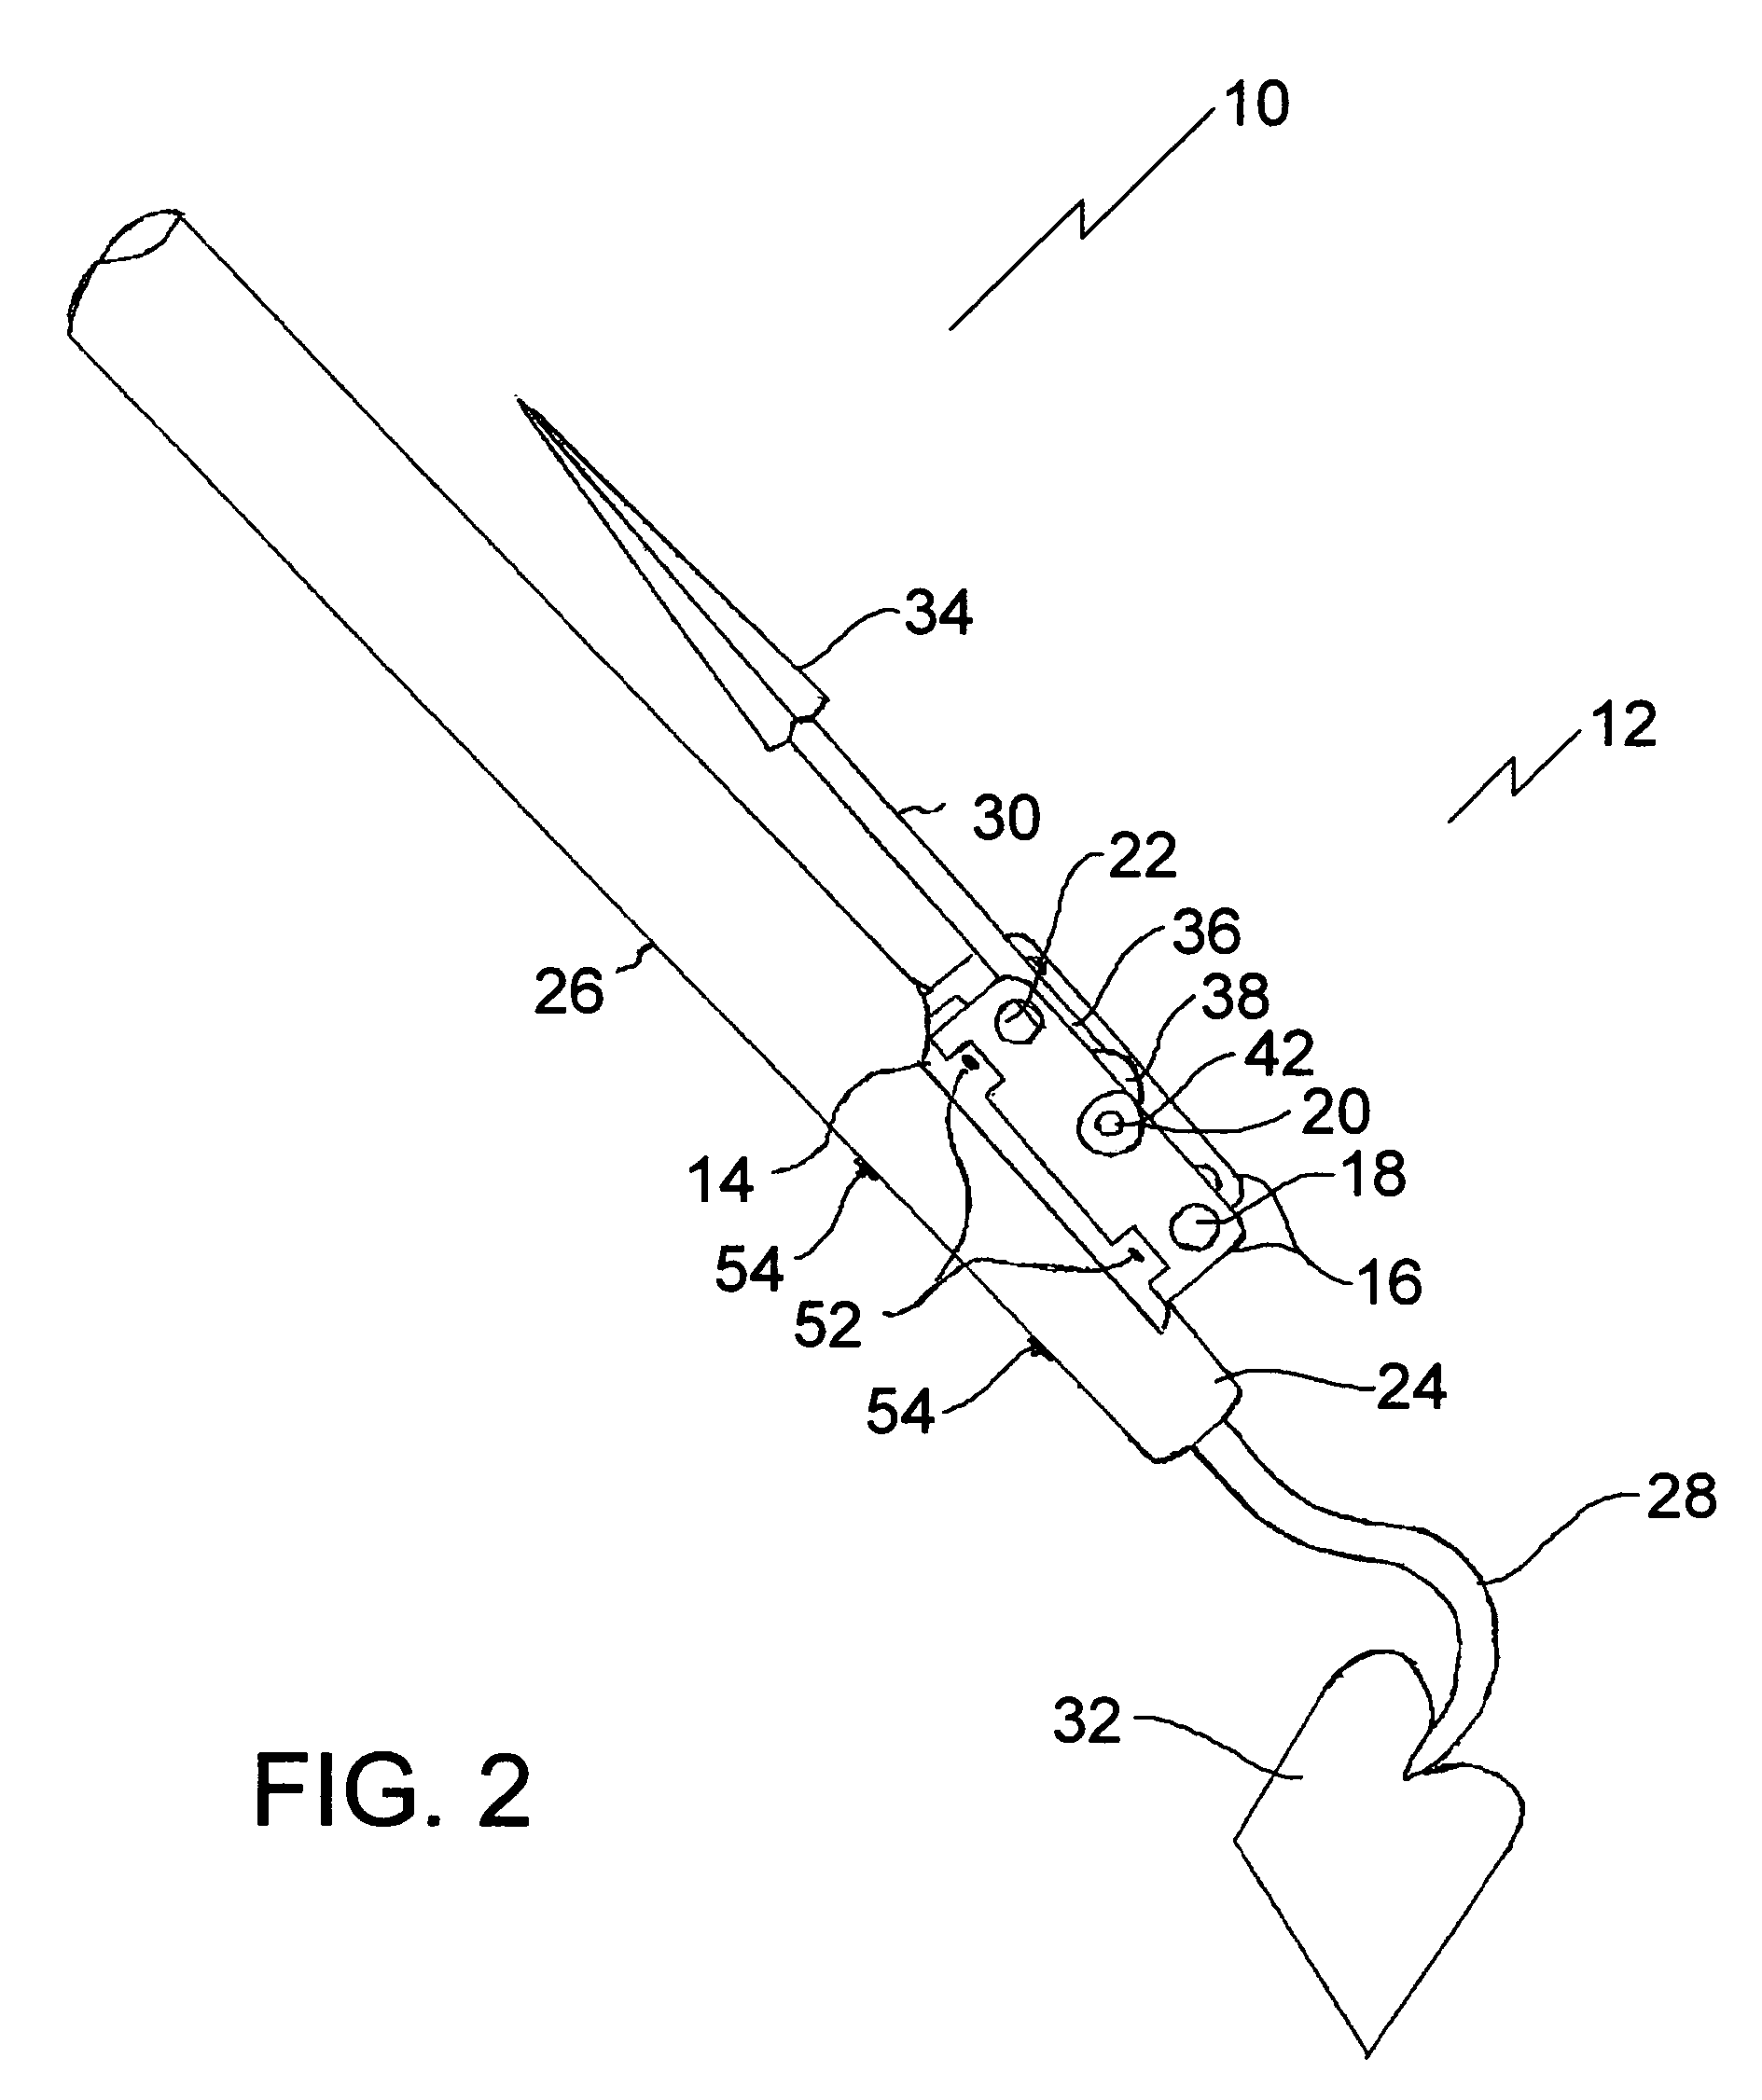 Tool support apparatus